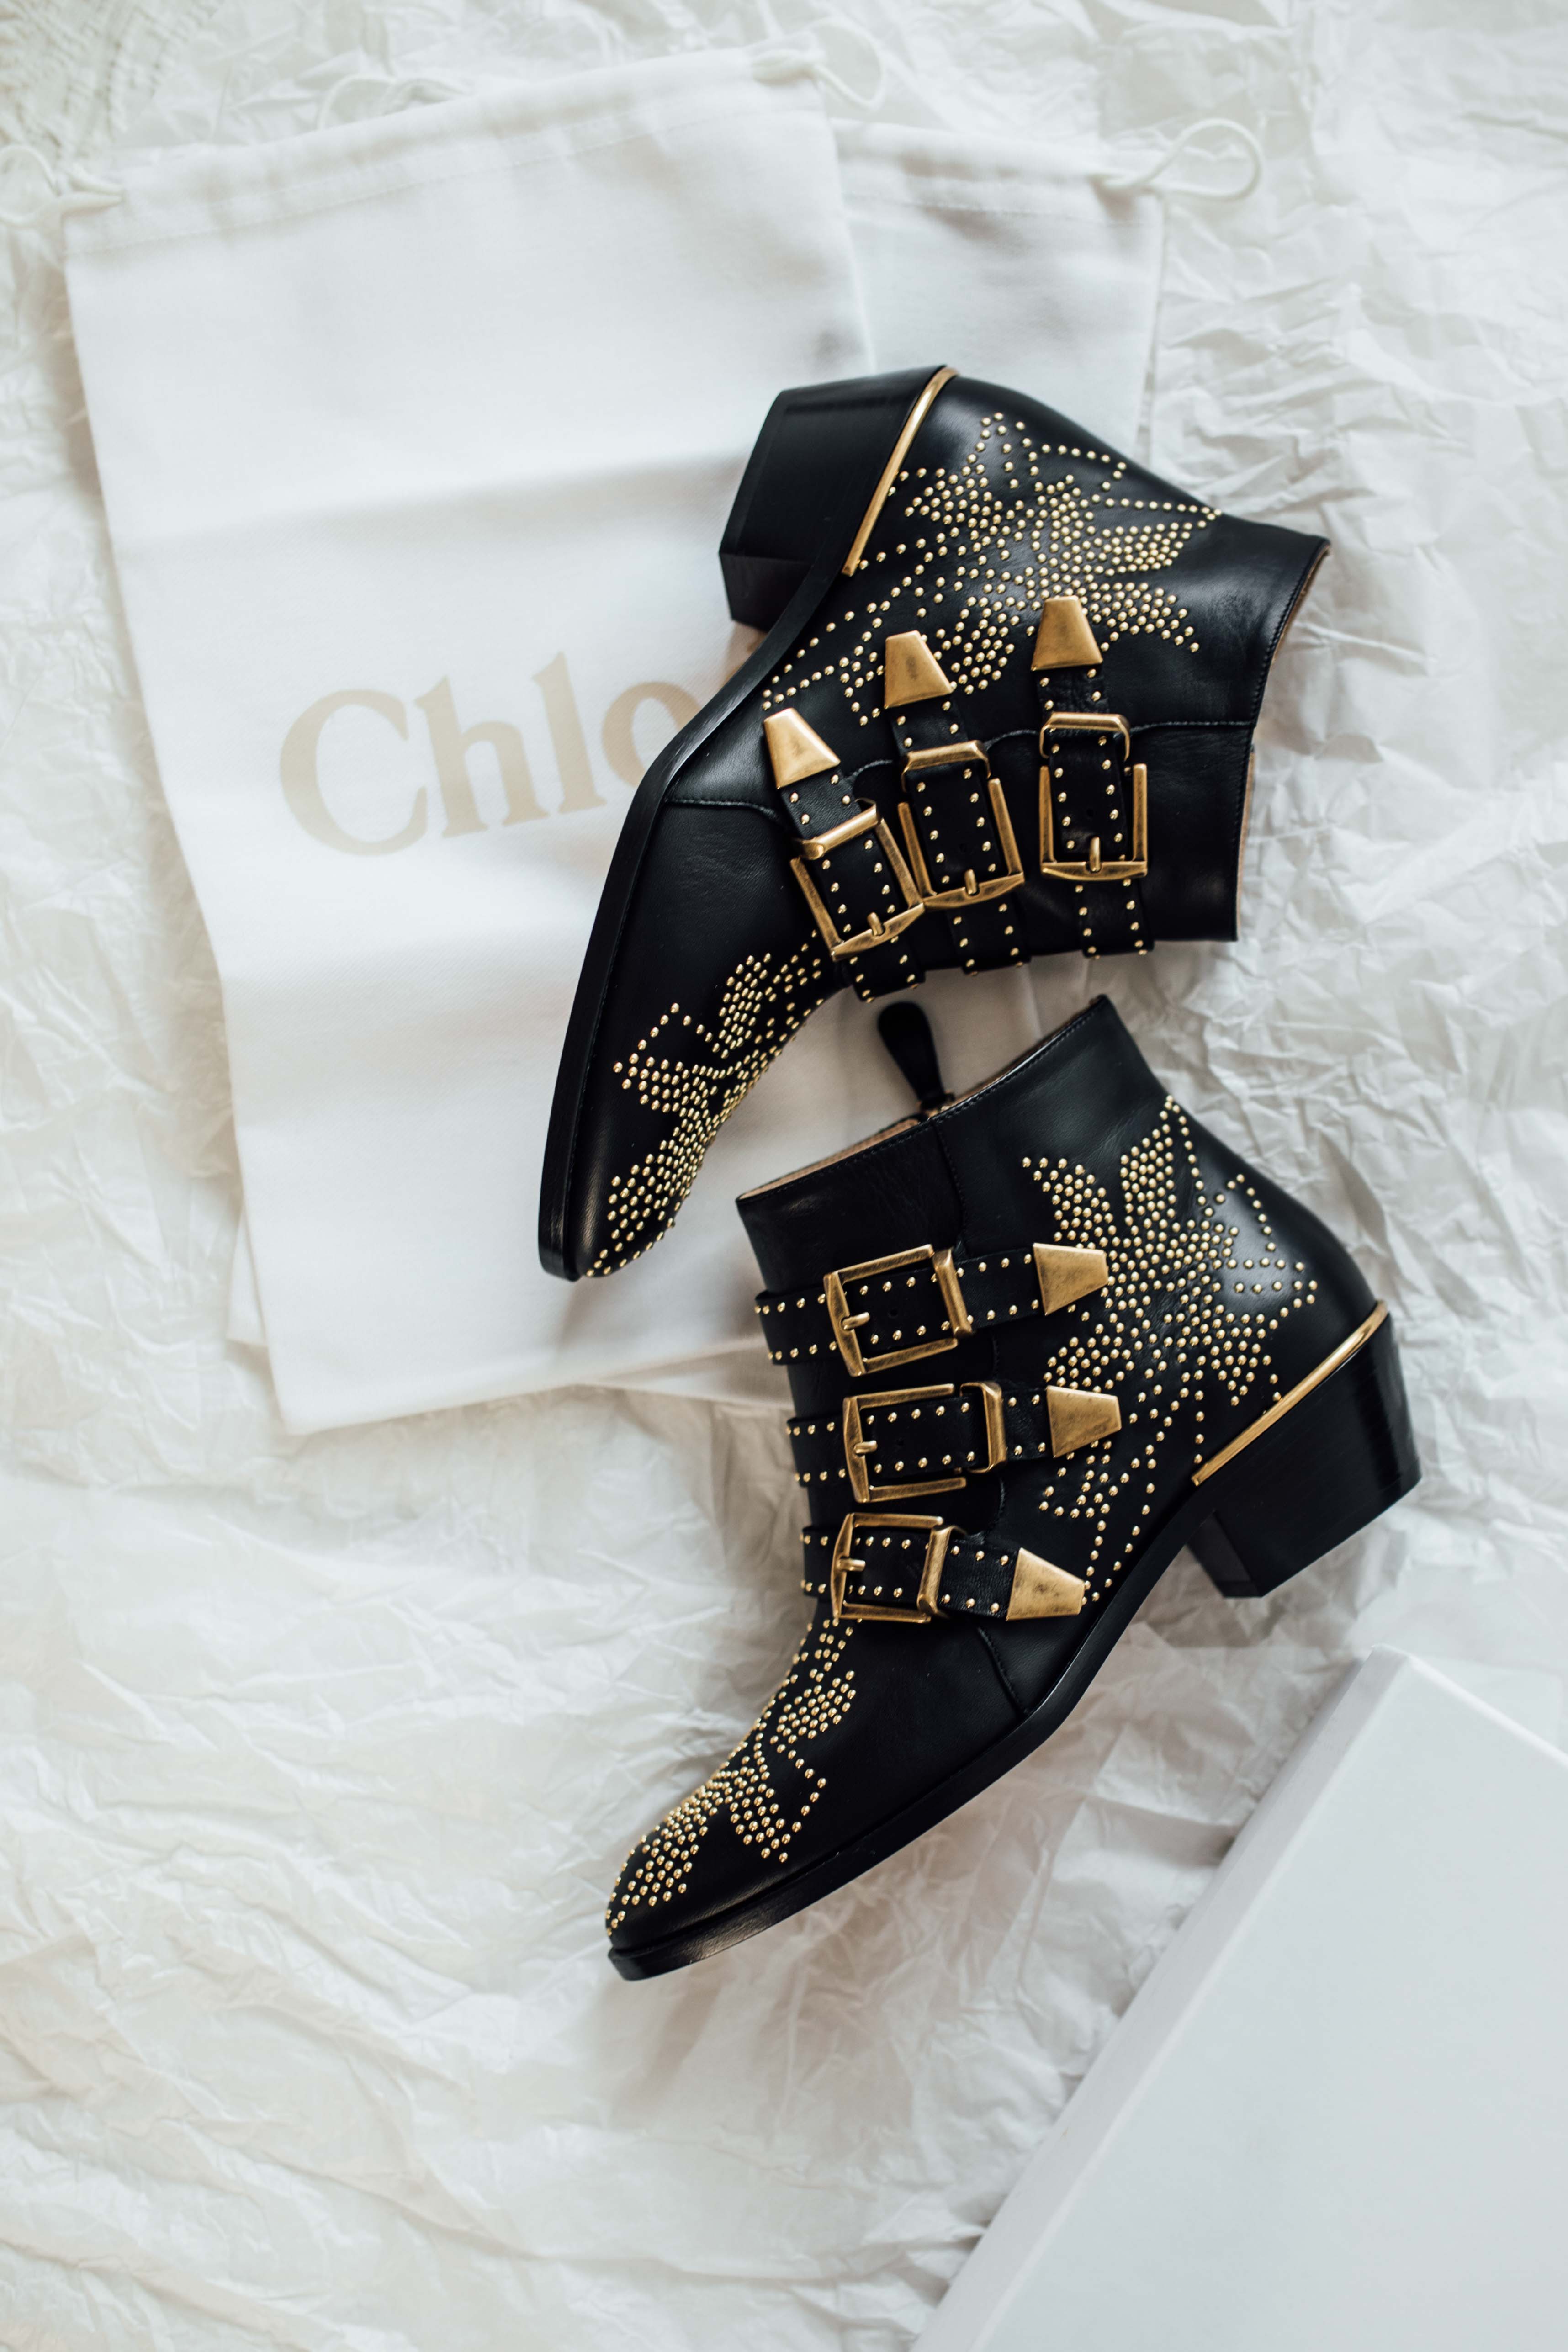 Chloé Susanna Boots in Black with Gold 